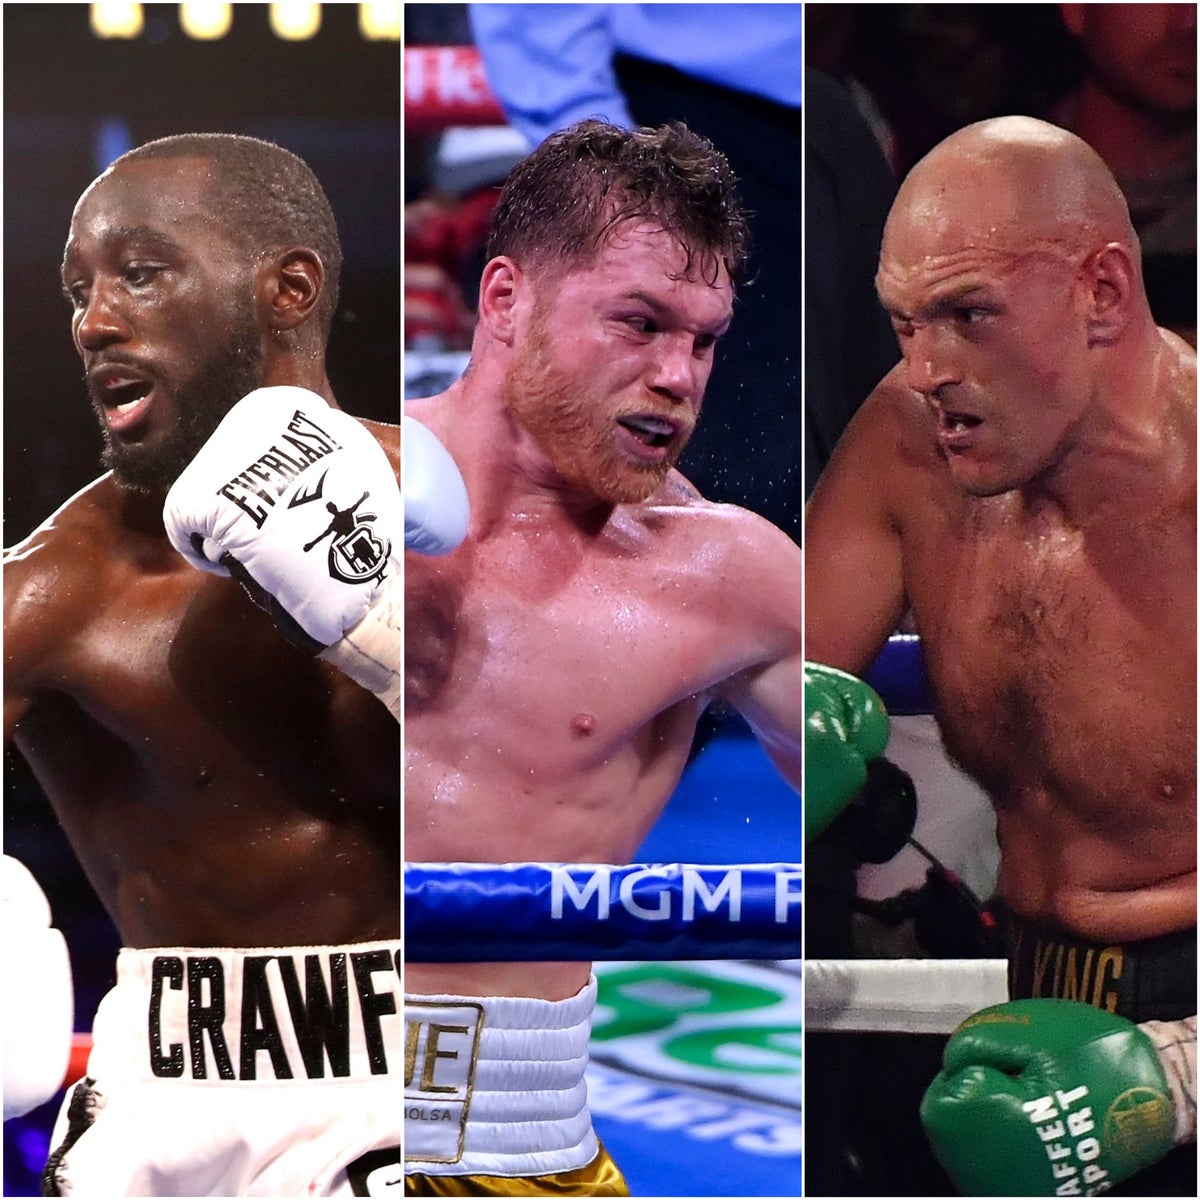 The Independent’s pound-for-pound boxing rankings